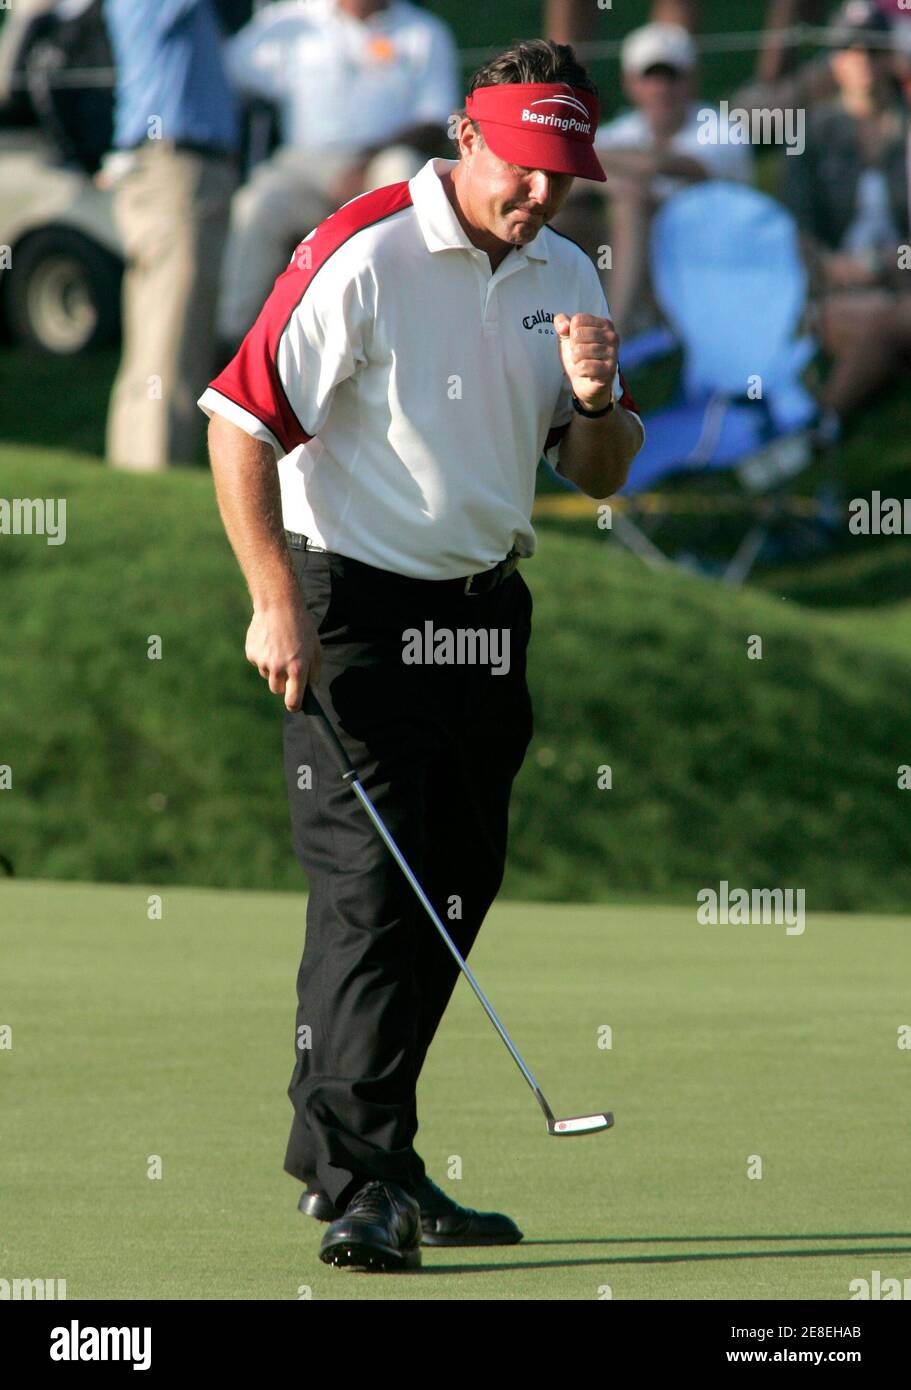 Phil Mickelson of the U.S. reacts after making an eagle putt on the 16th hole during the second round of play at The Players Championship golf tournament in Ponte Vedra Beach, Florida, May 11, 2007. Mickelson finished the round at five-under-par with a score of 139. REUTERS/Rick Fowler  (UNITED STATES) Stock Photo